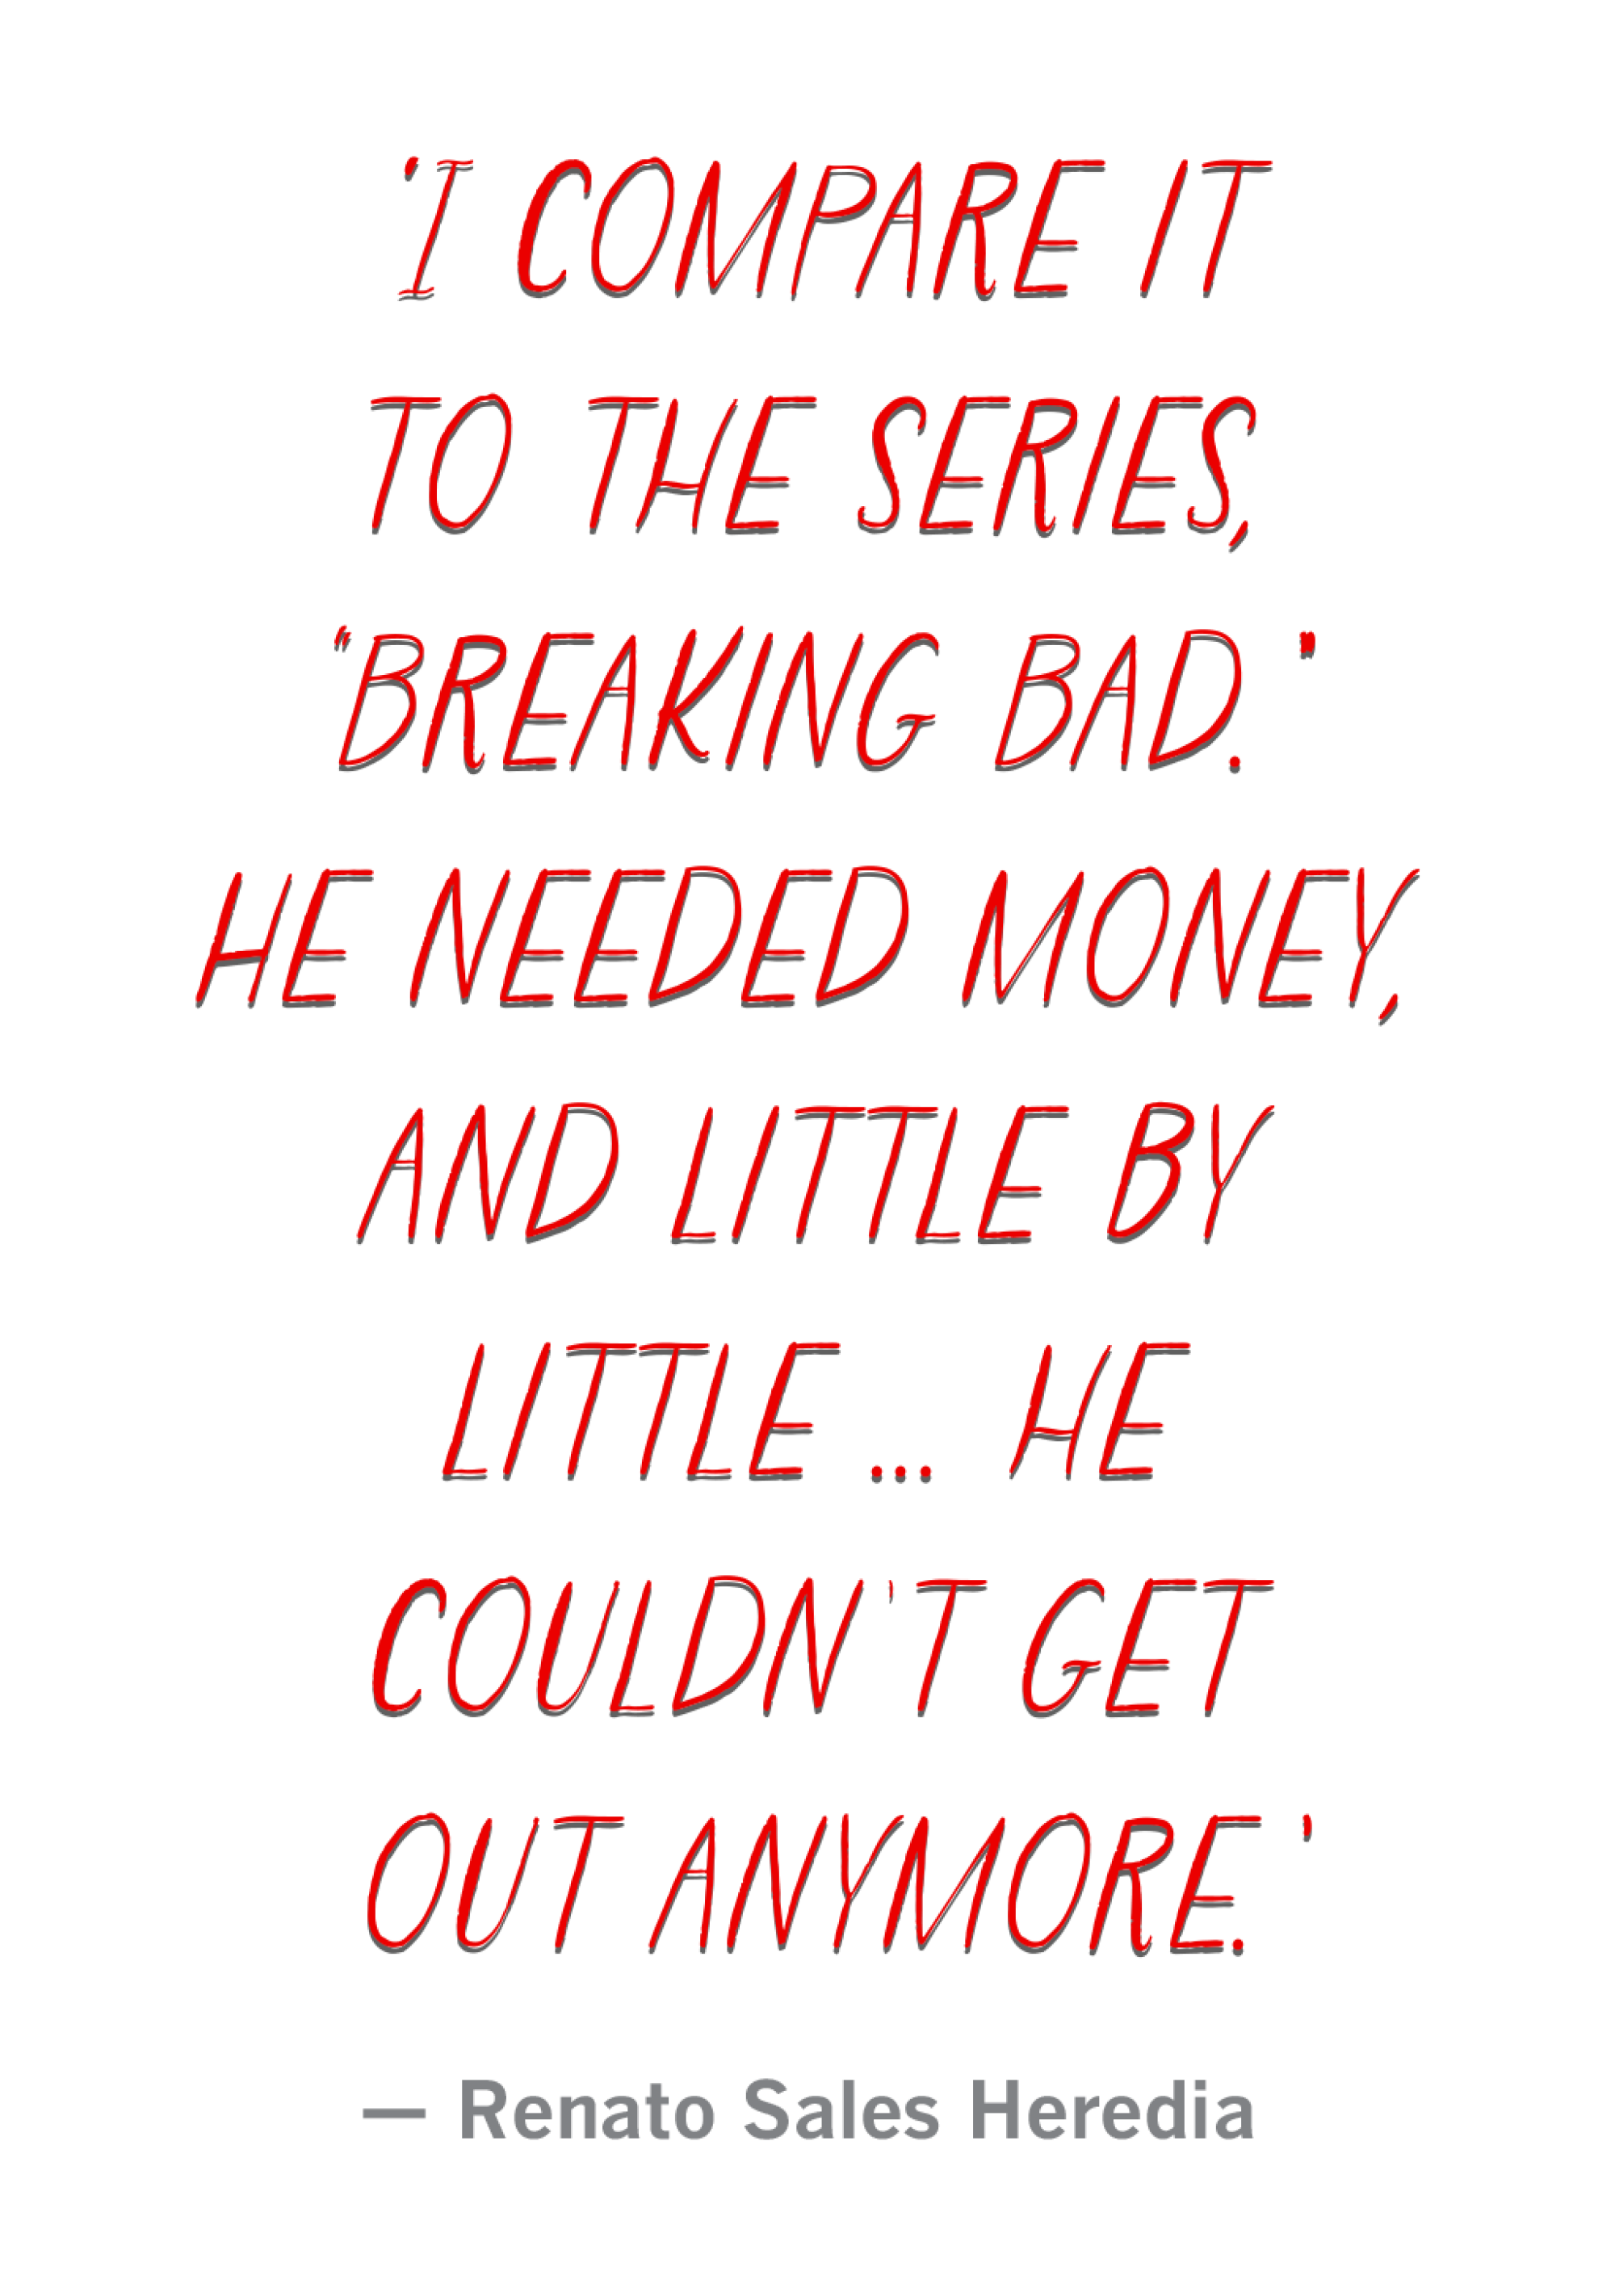 "I compare it to the series, "Breaking Bad." He needed money, and little by little ... he couldn’t get out anymore."